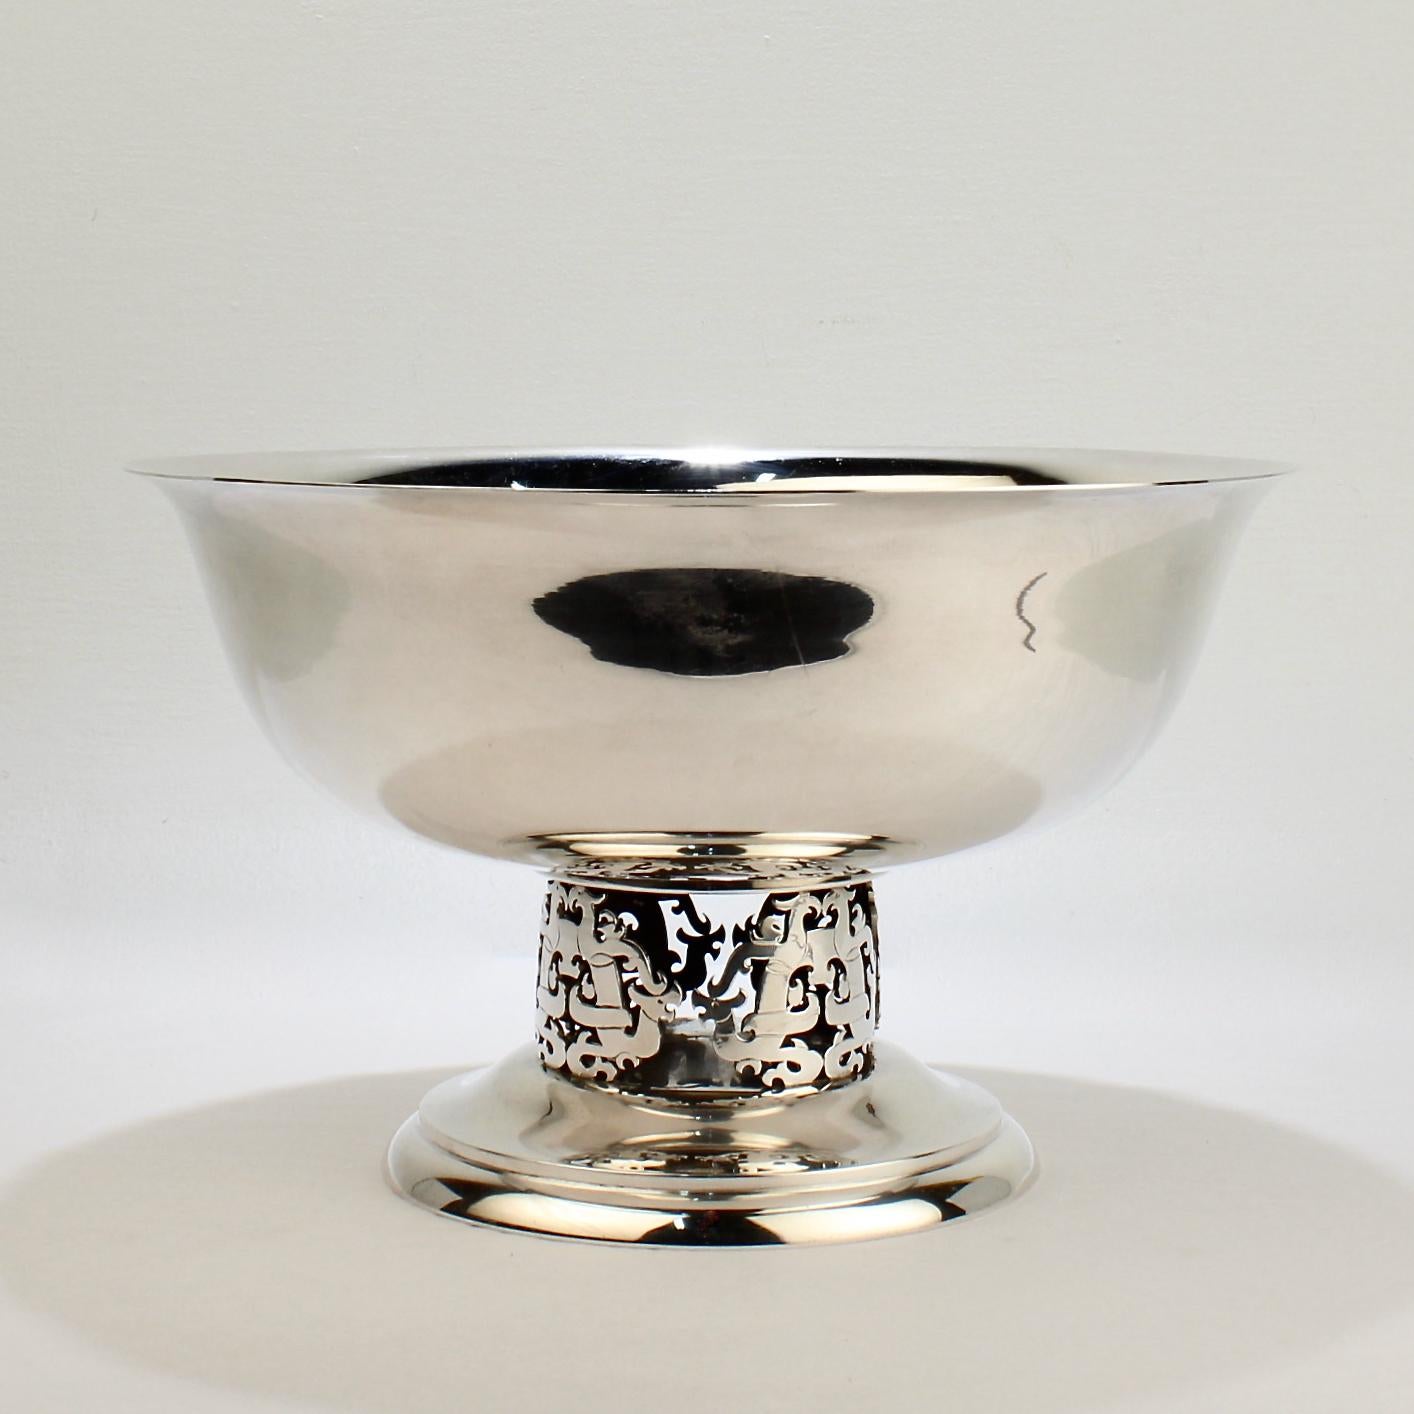 A very fine, large sized punch bowl by Allan Adler. 

The pierced pedestal incorporates Chinese iconography with dragons and stylized phoenixes. 

The mid-century design is perfect for a stylish Hollywood Regency or (any Mid-Century Modern) room